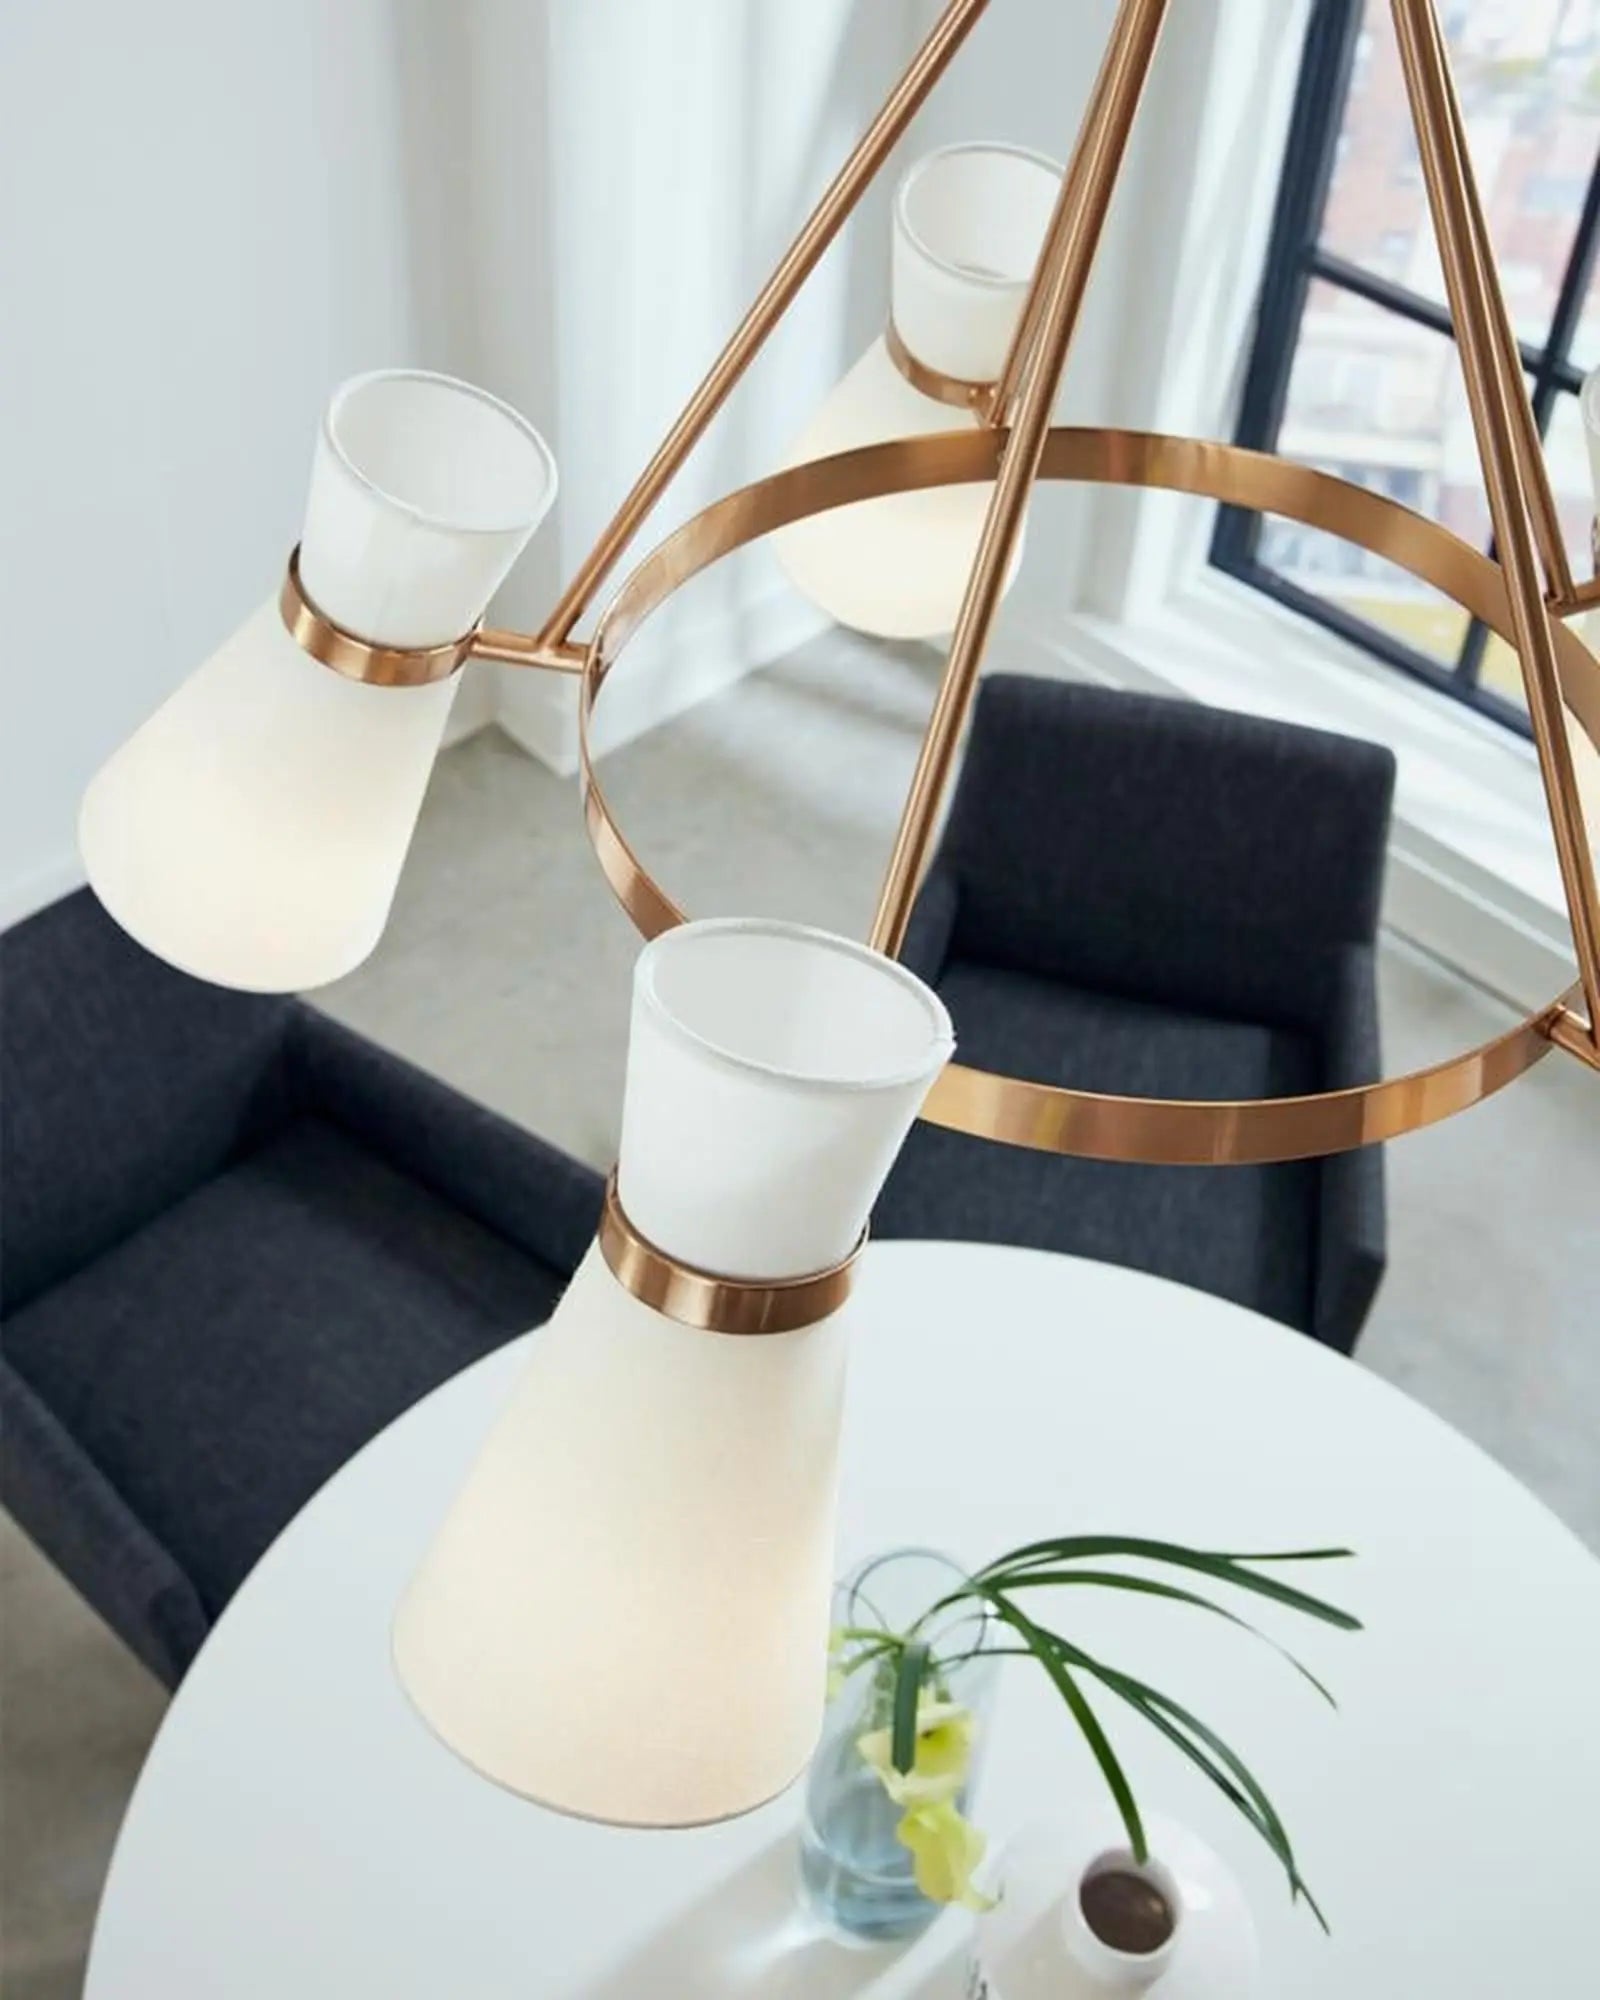 Clark Pendant light above a round table